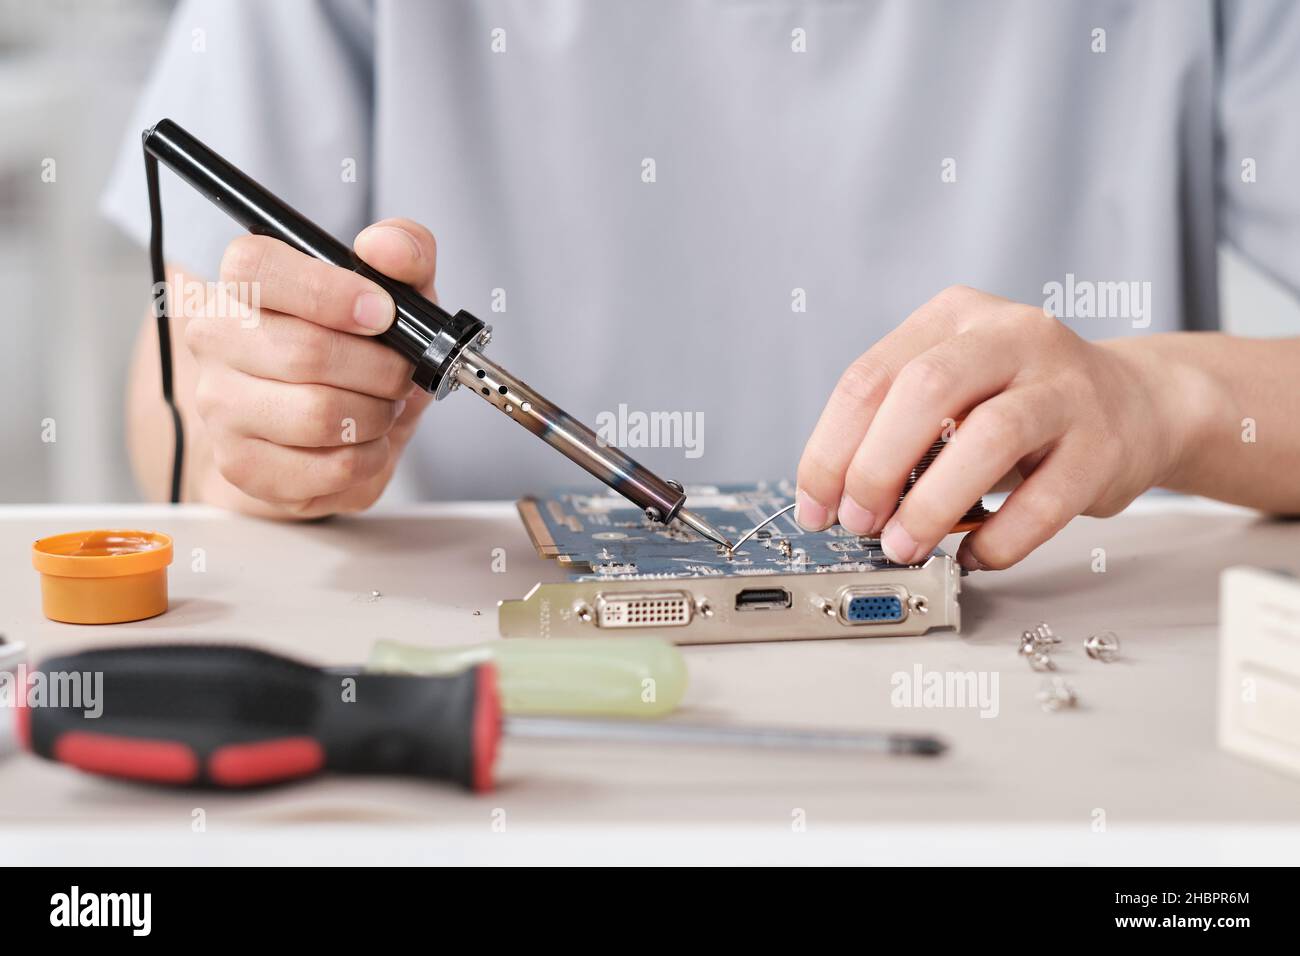 Hands of young contemporary technician with soldering iron repairing motherboard with microchip Stock Photo